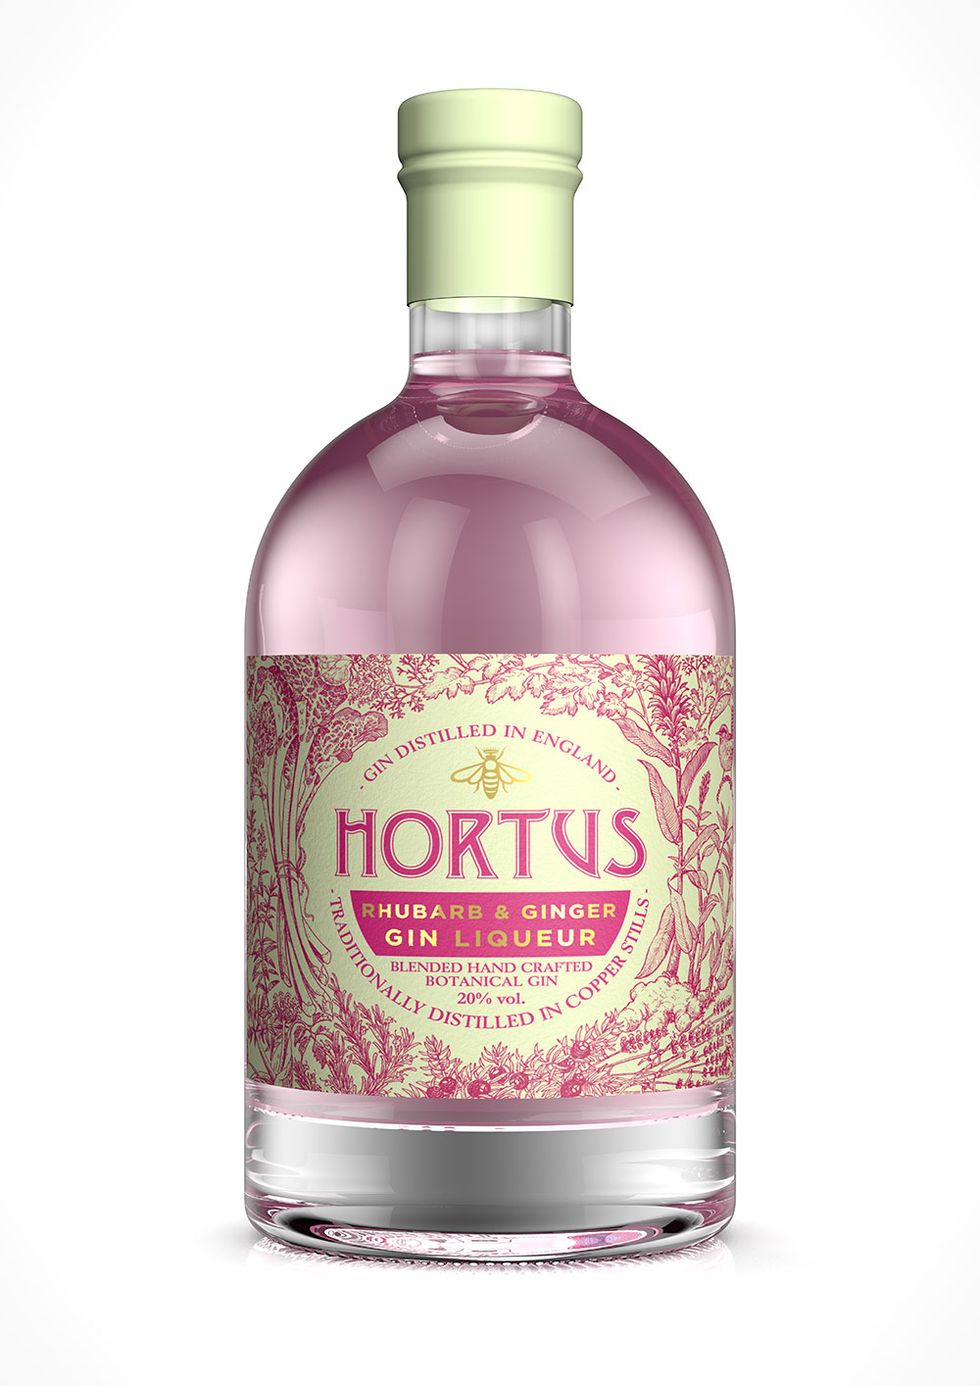 Lidl rhubarb and ginger gin liqueur